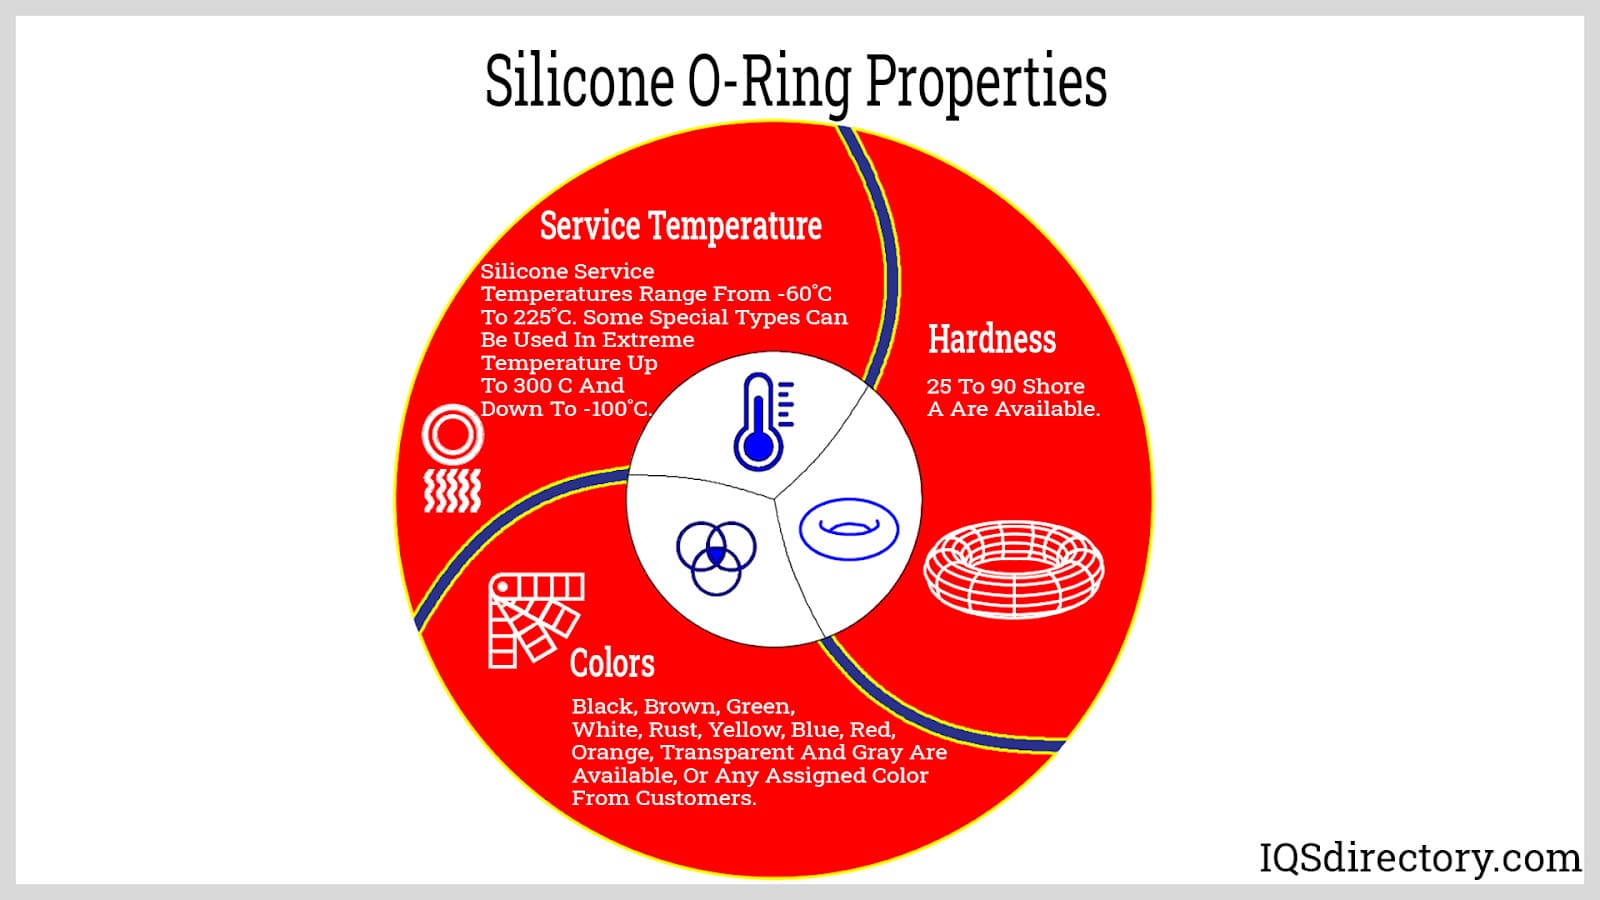 Silicone O-Ring Properties